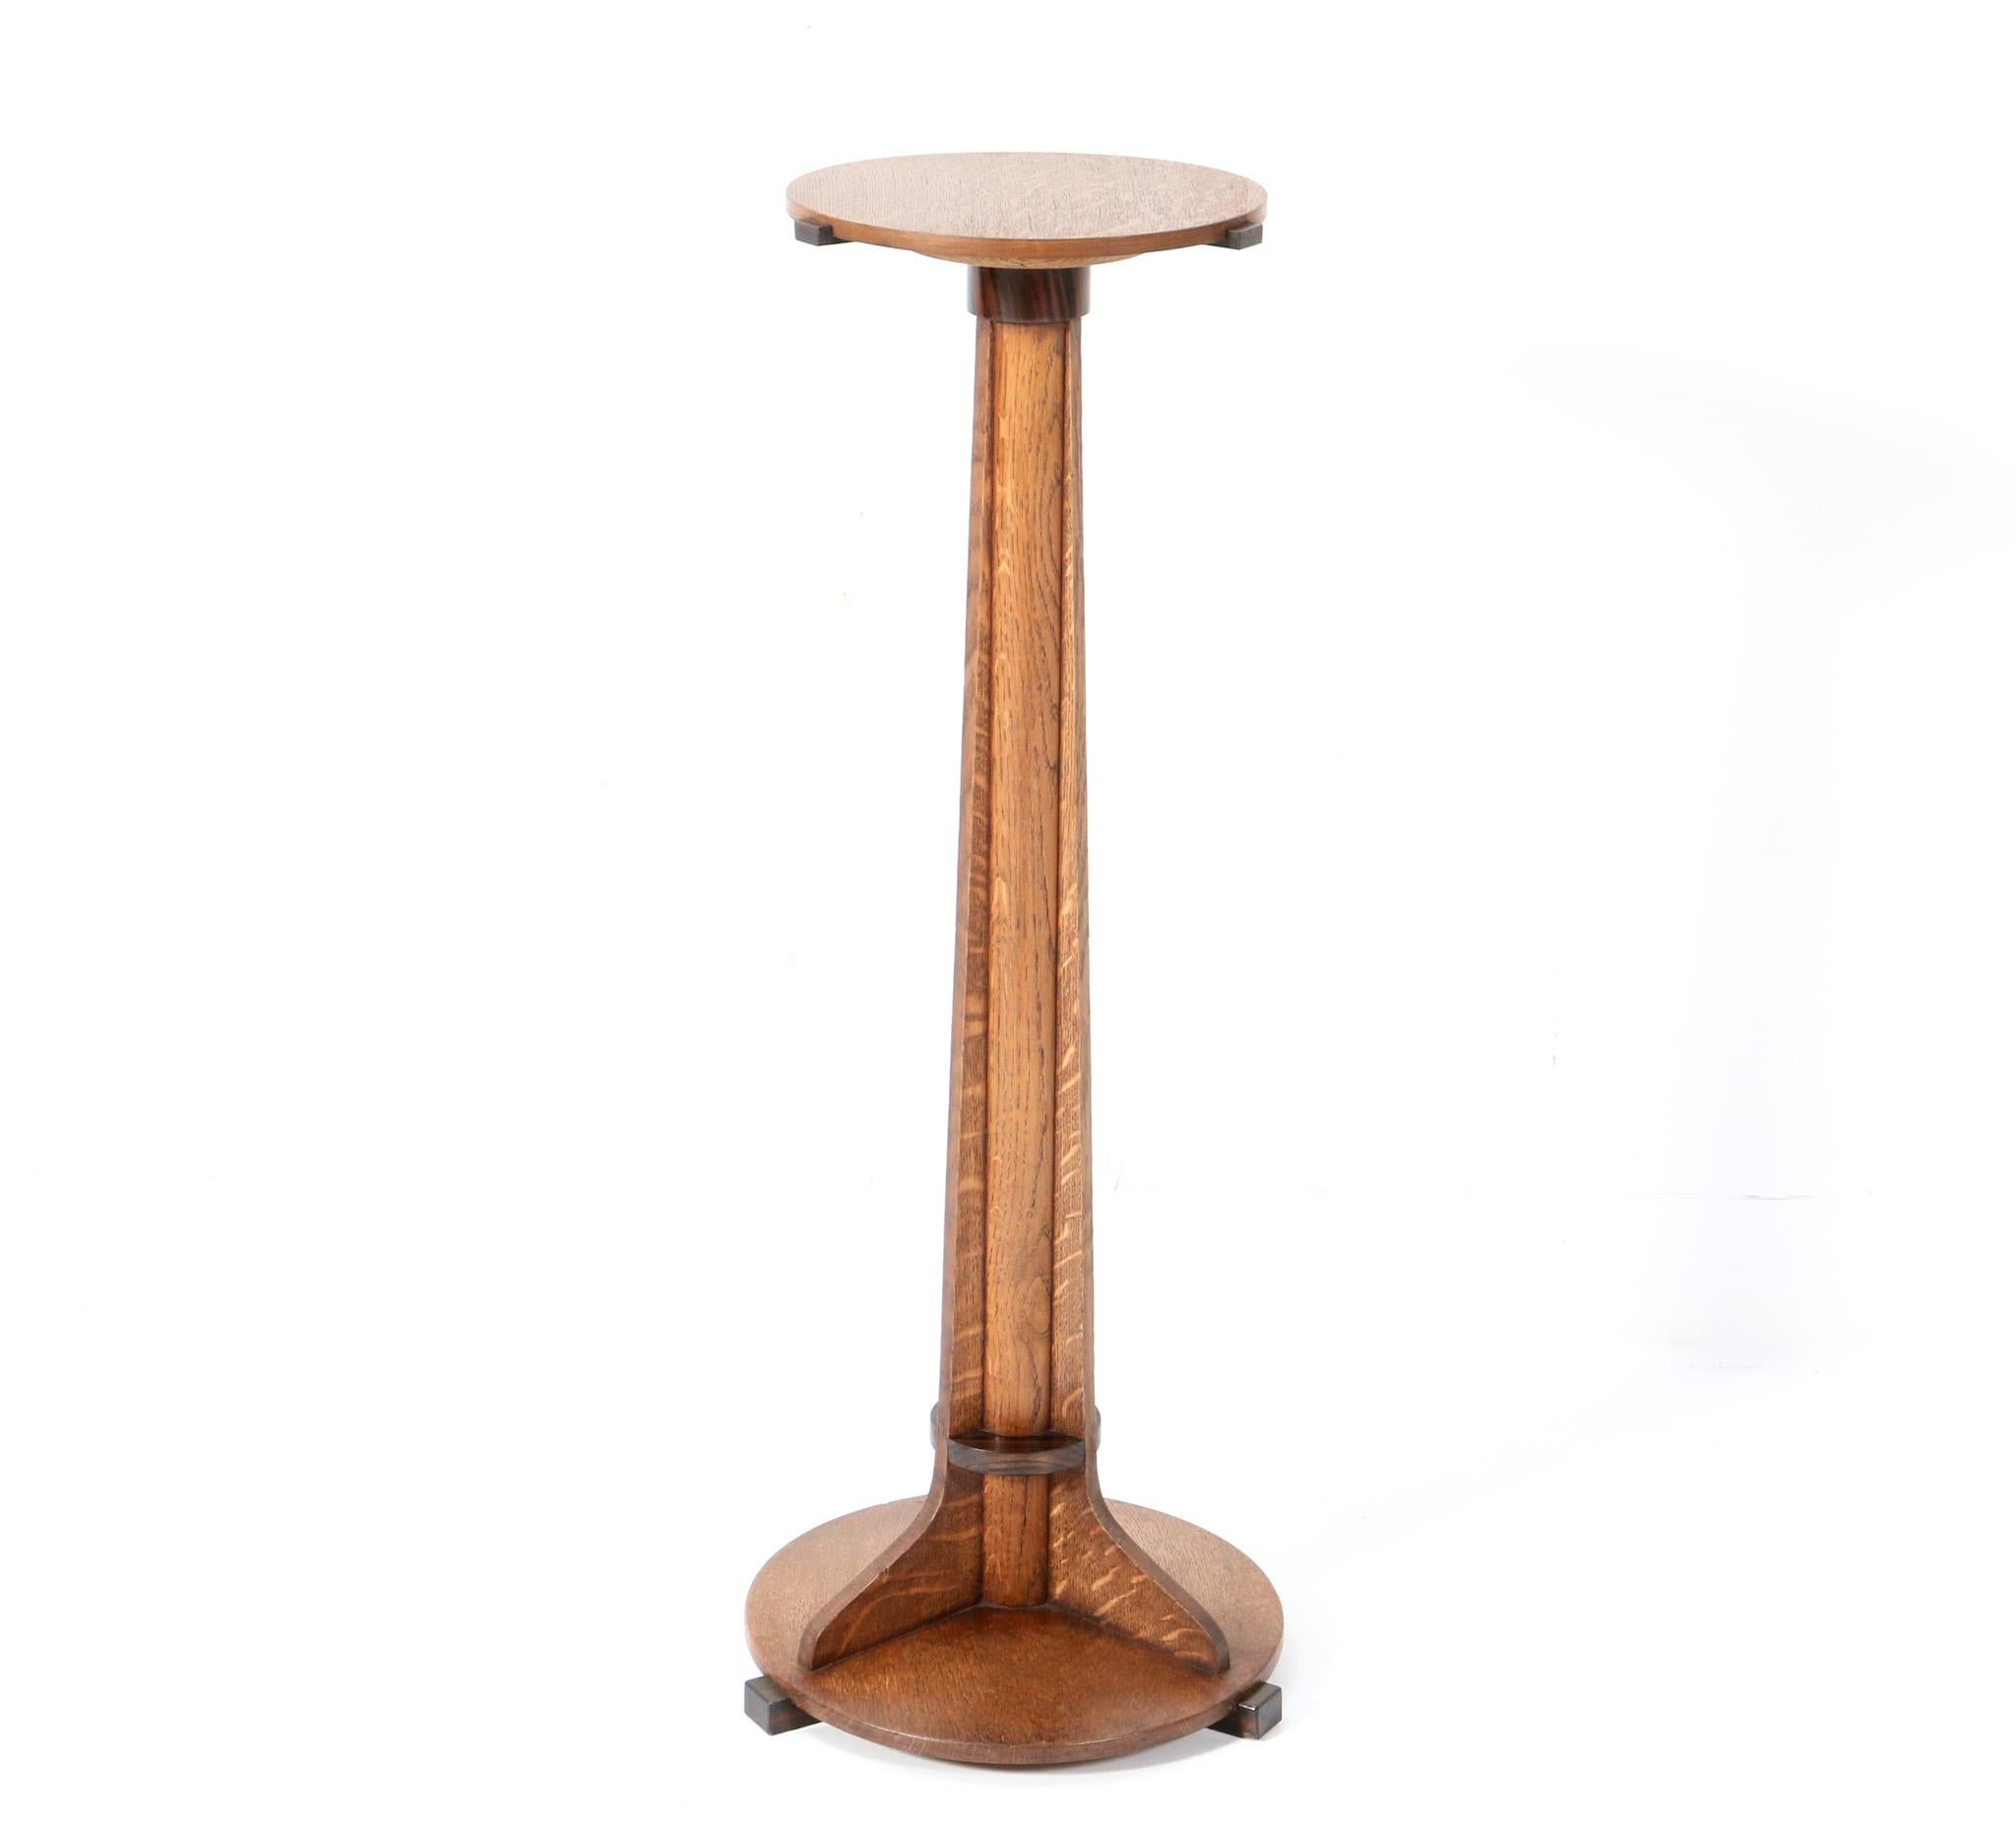 Stunning and elegant Art Deco Modernist pedestal
Striking Dutch design from the 1920s.
Solid oak frame with solid macassar ebony elements.
This wonderful Art Deco Modernist pedestal is in very good original condition with minor wear consistent with